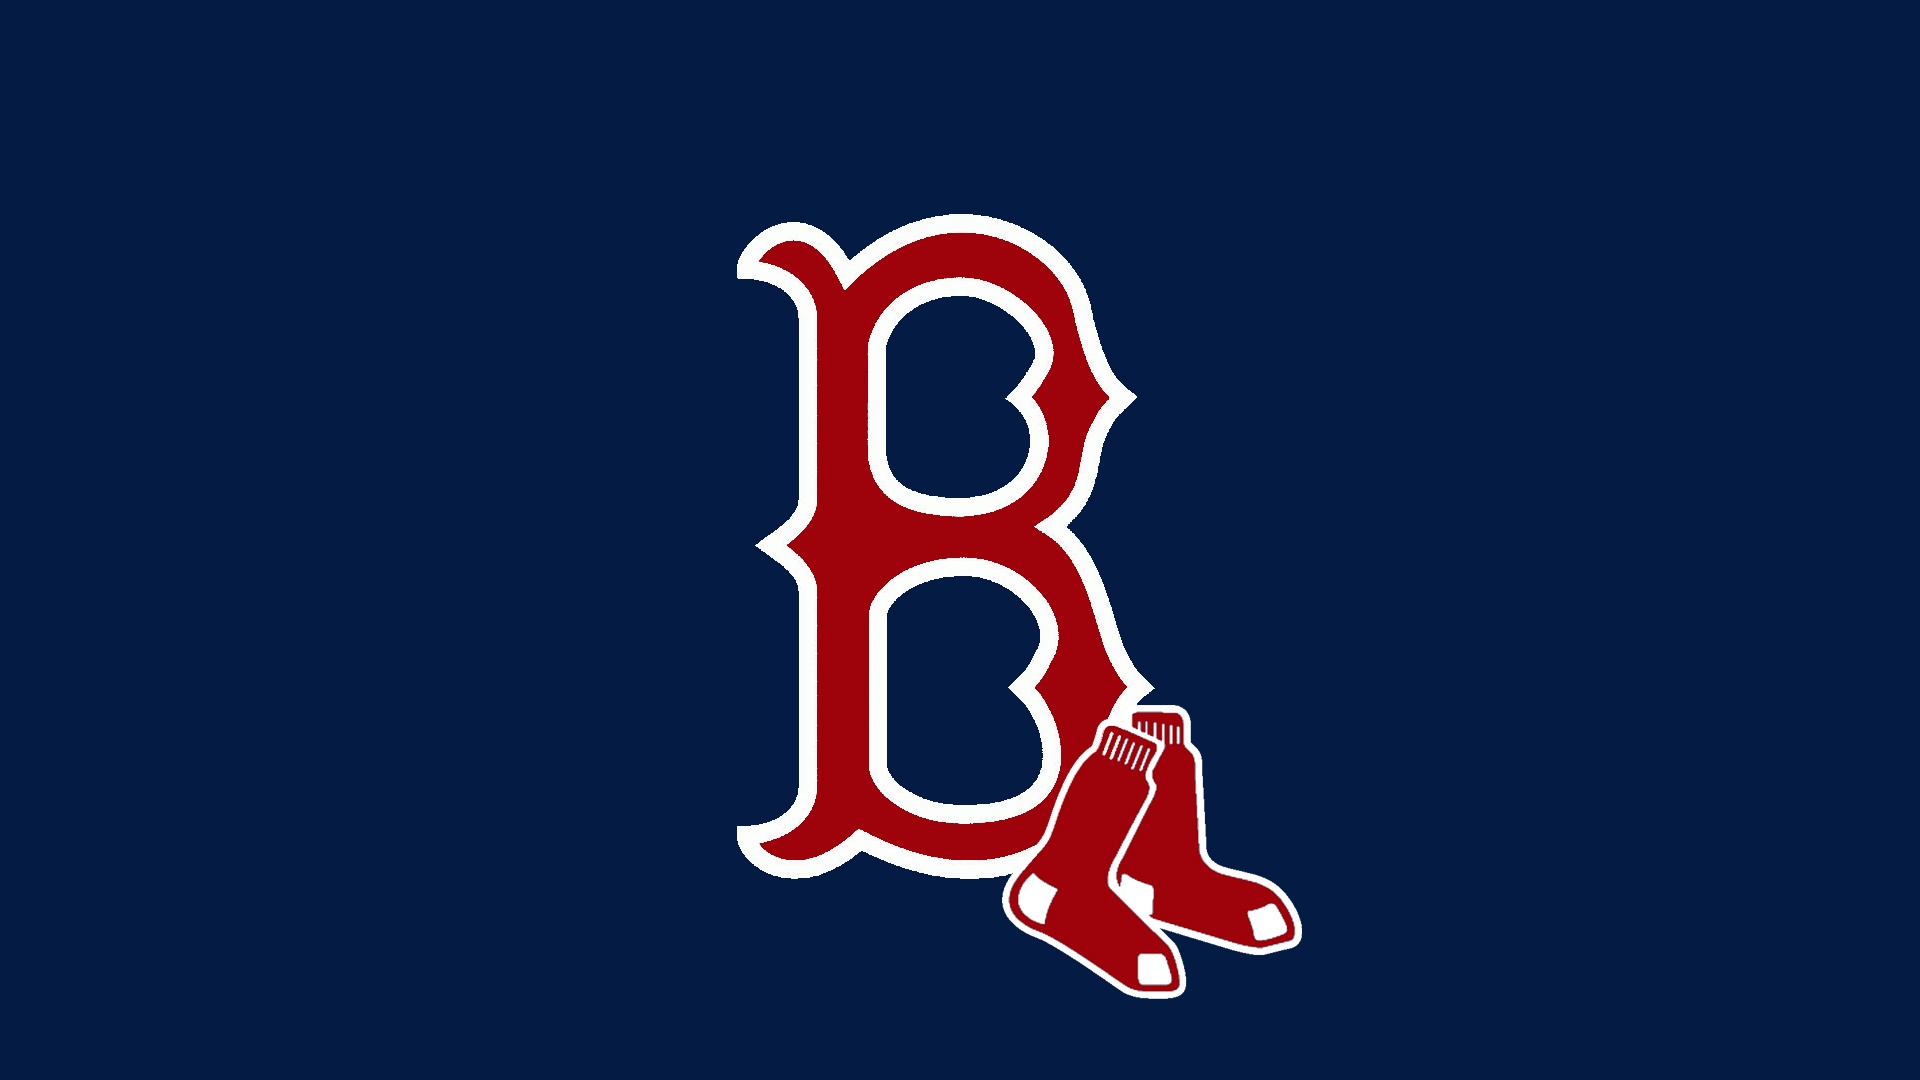 Boston Red Sox Logo Wallpaper HD wide - Clipart library - Clipart library